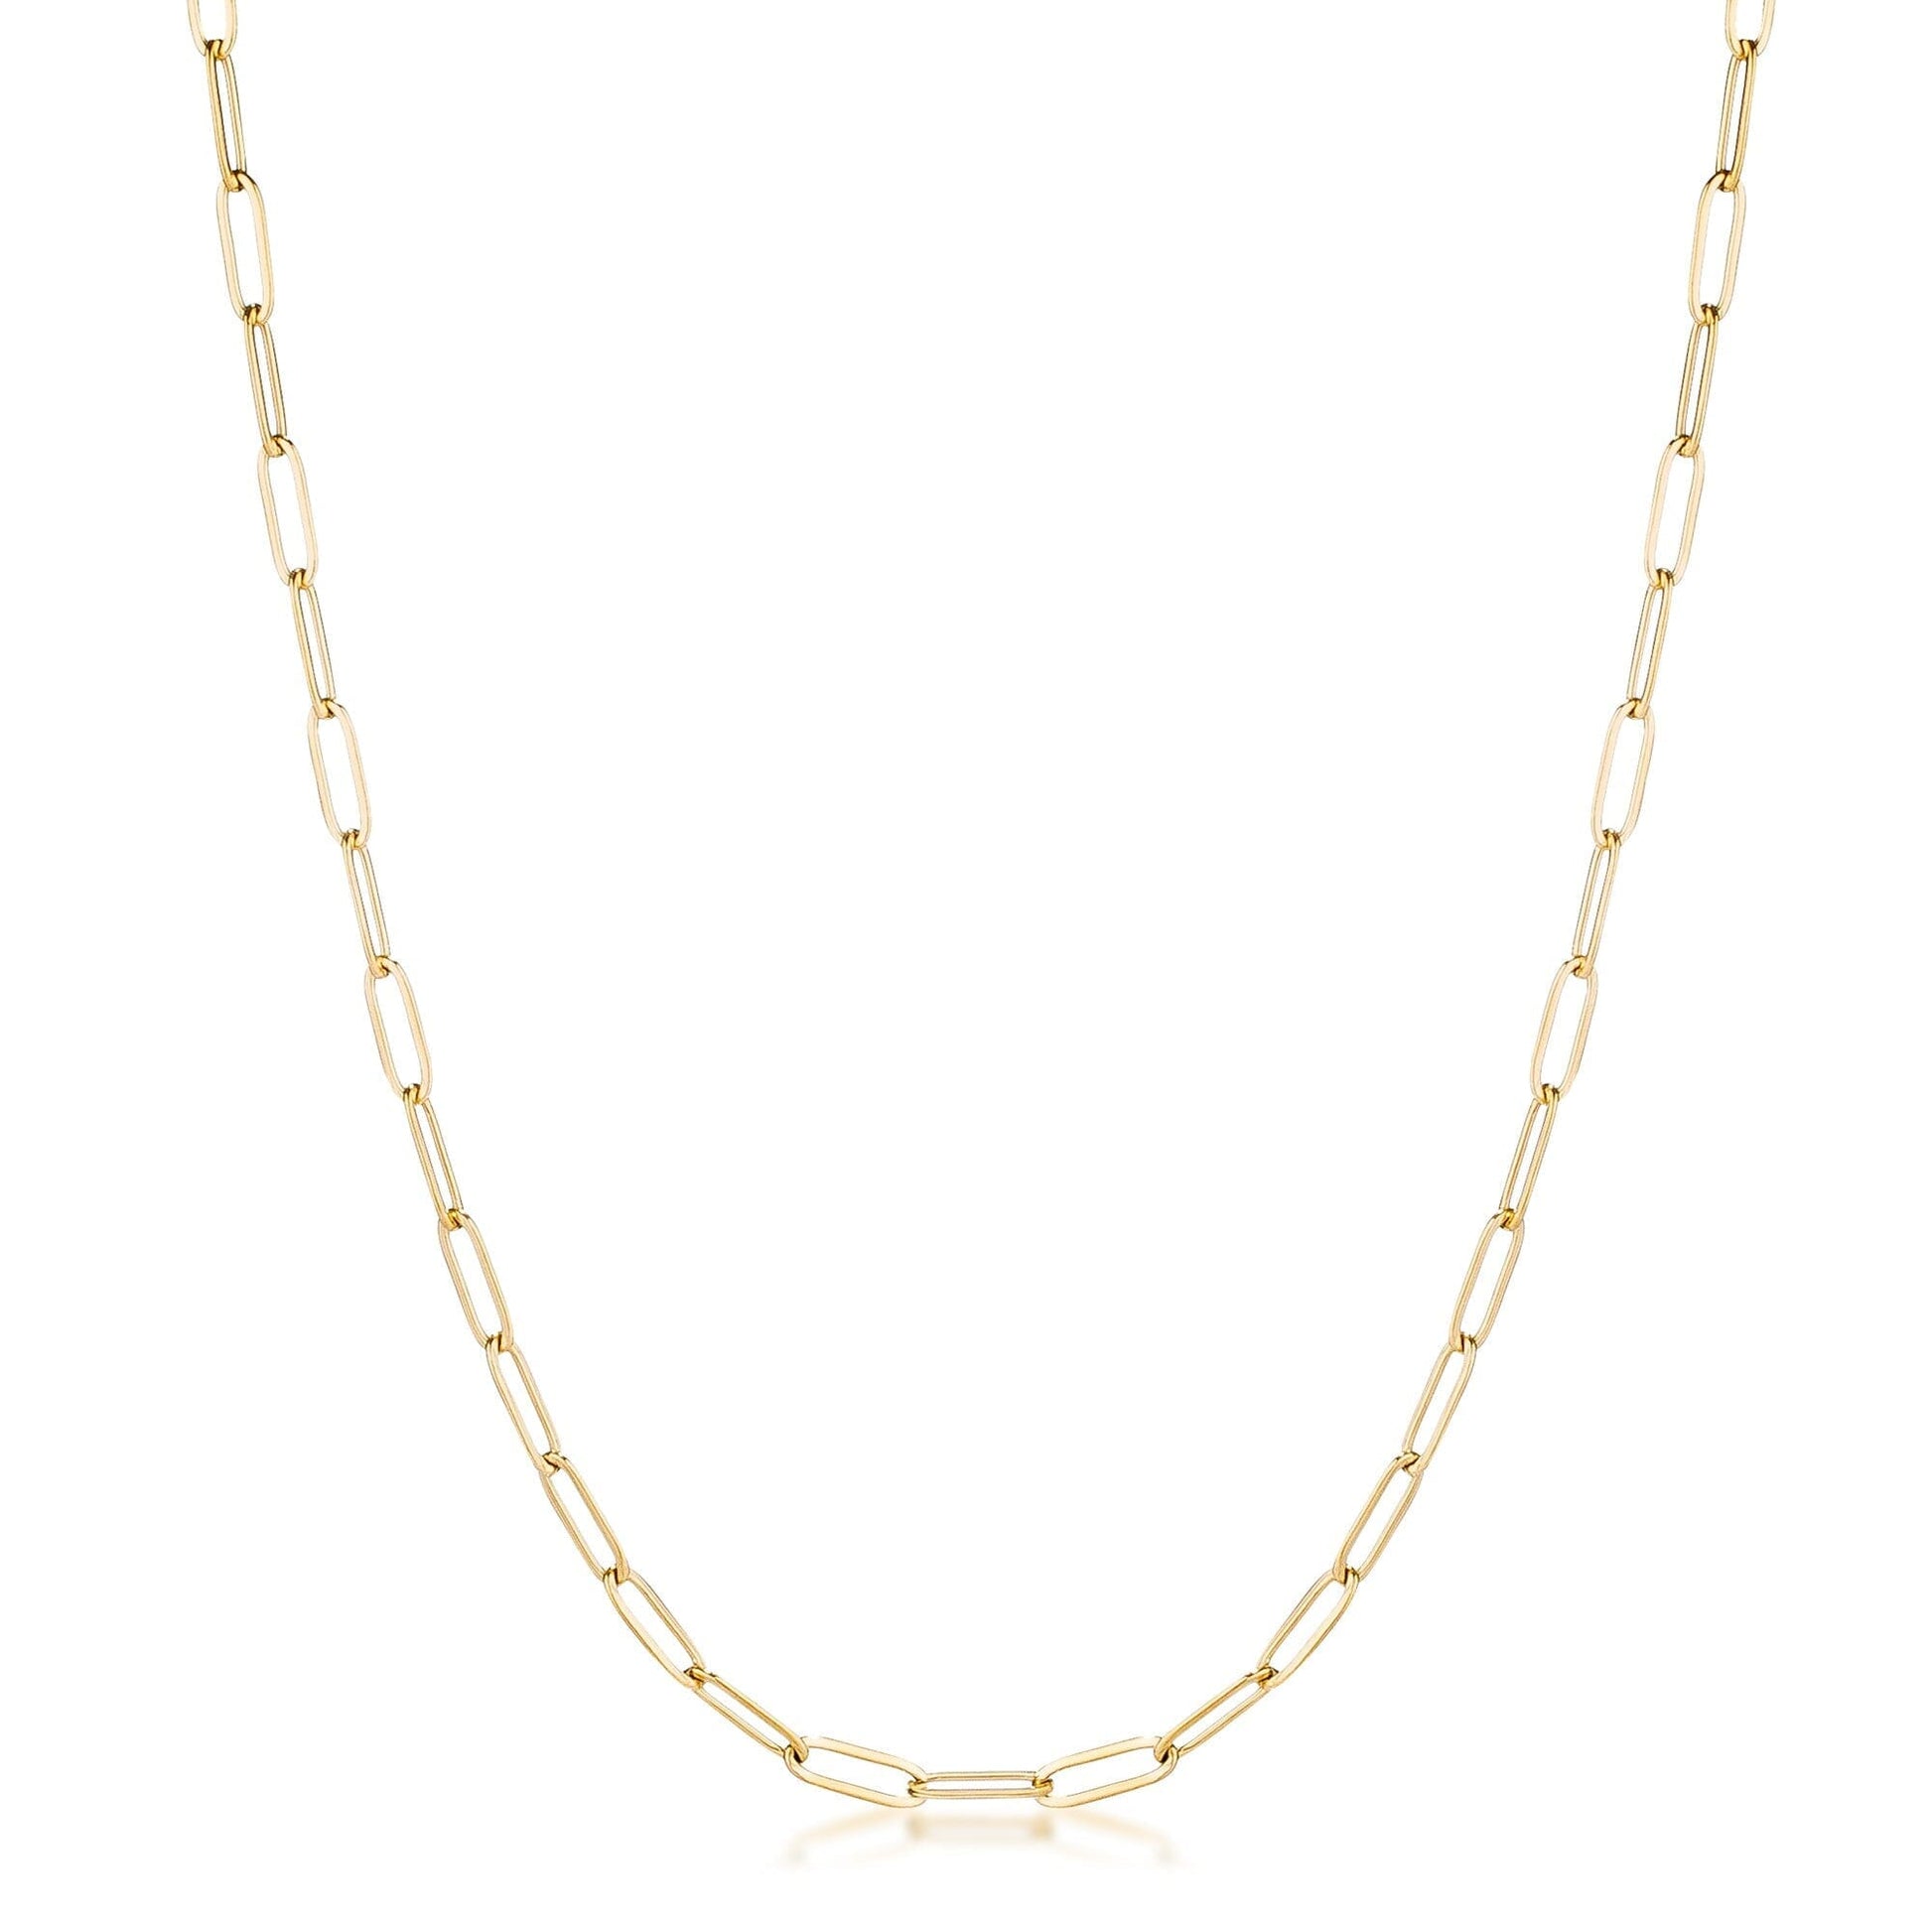 16 Gold Plated Linked Petite Paperclip Chain Necklace Necklaces Das Juwel 